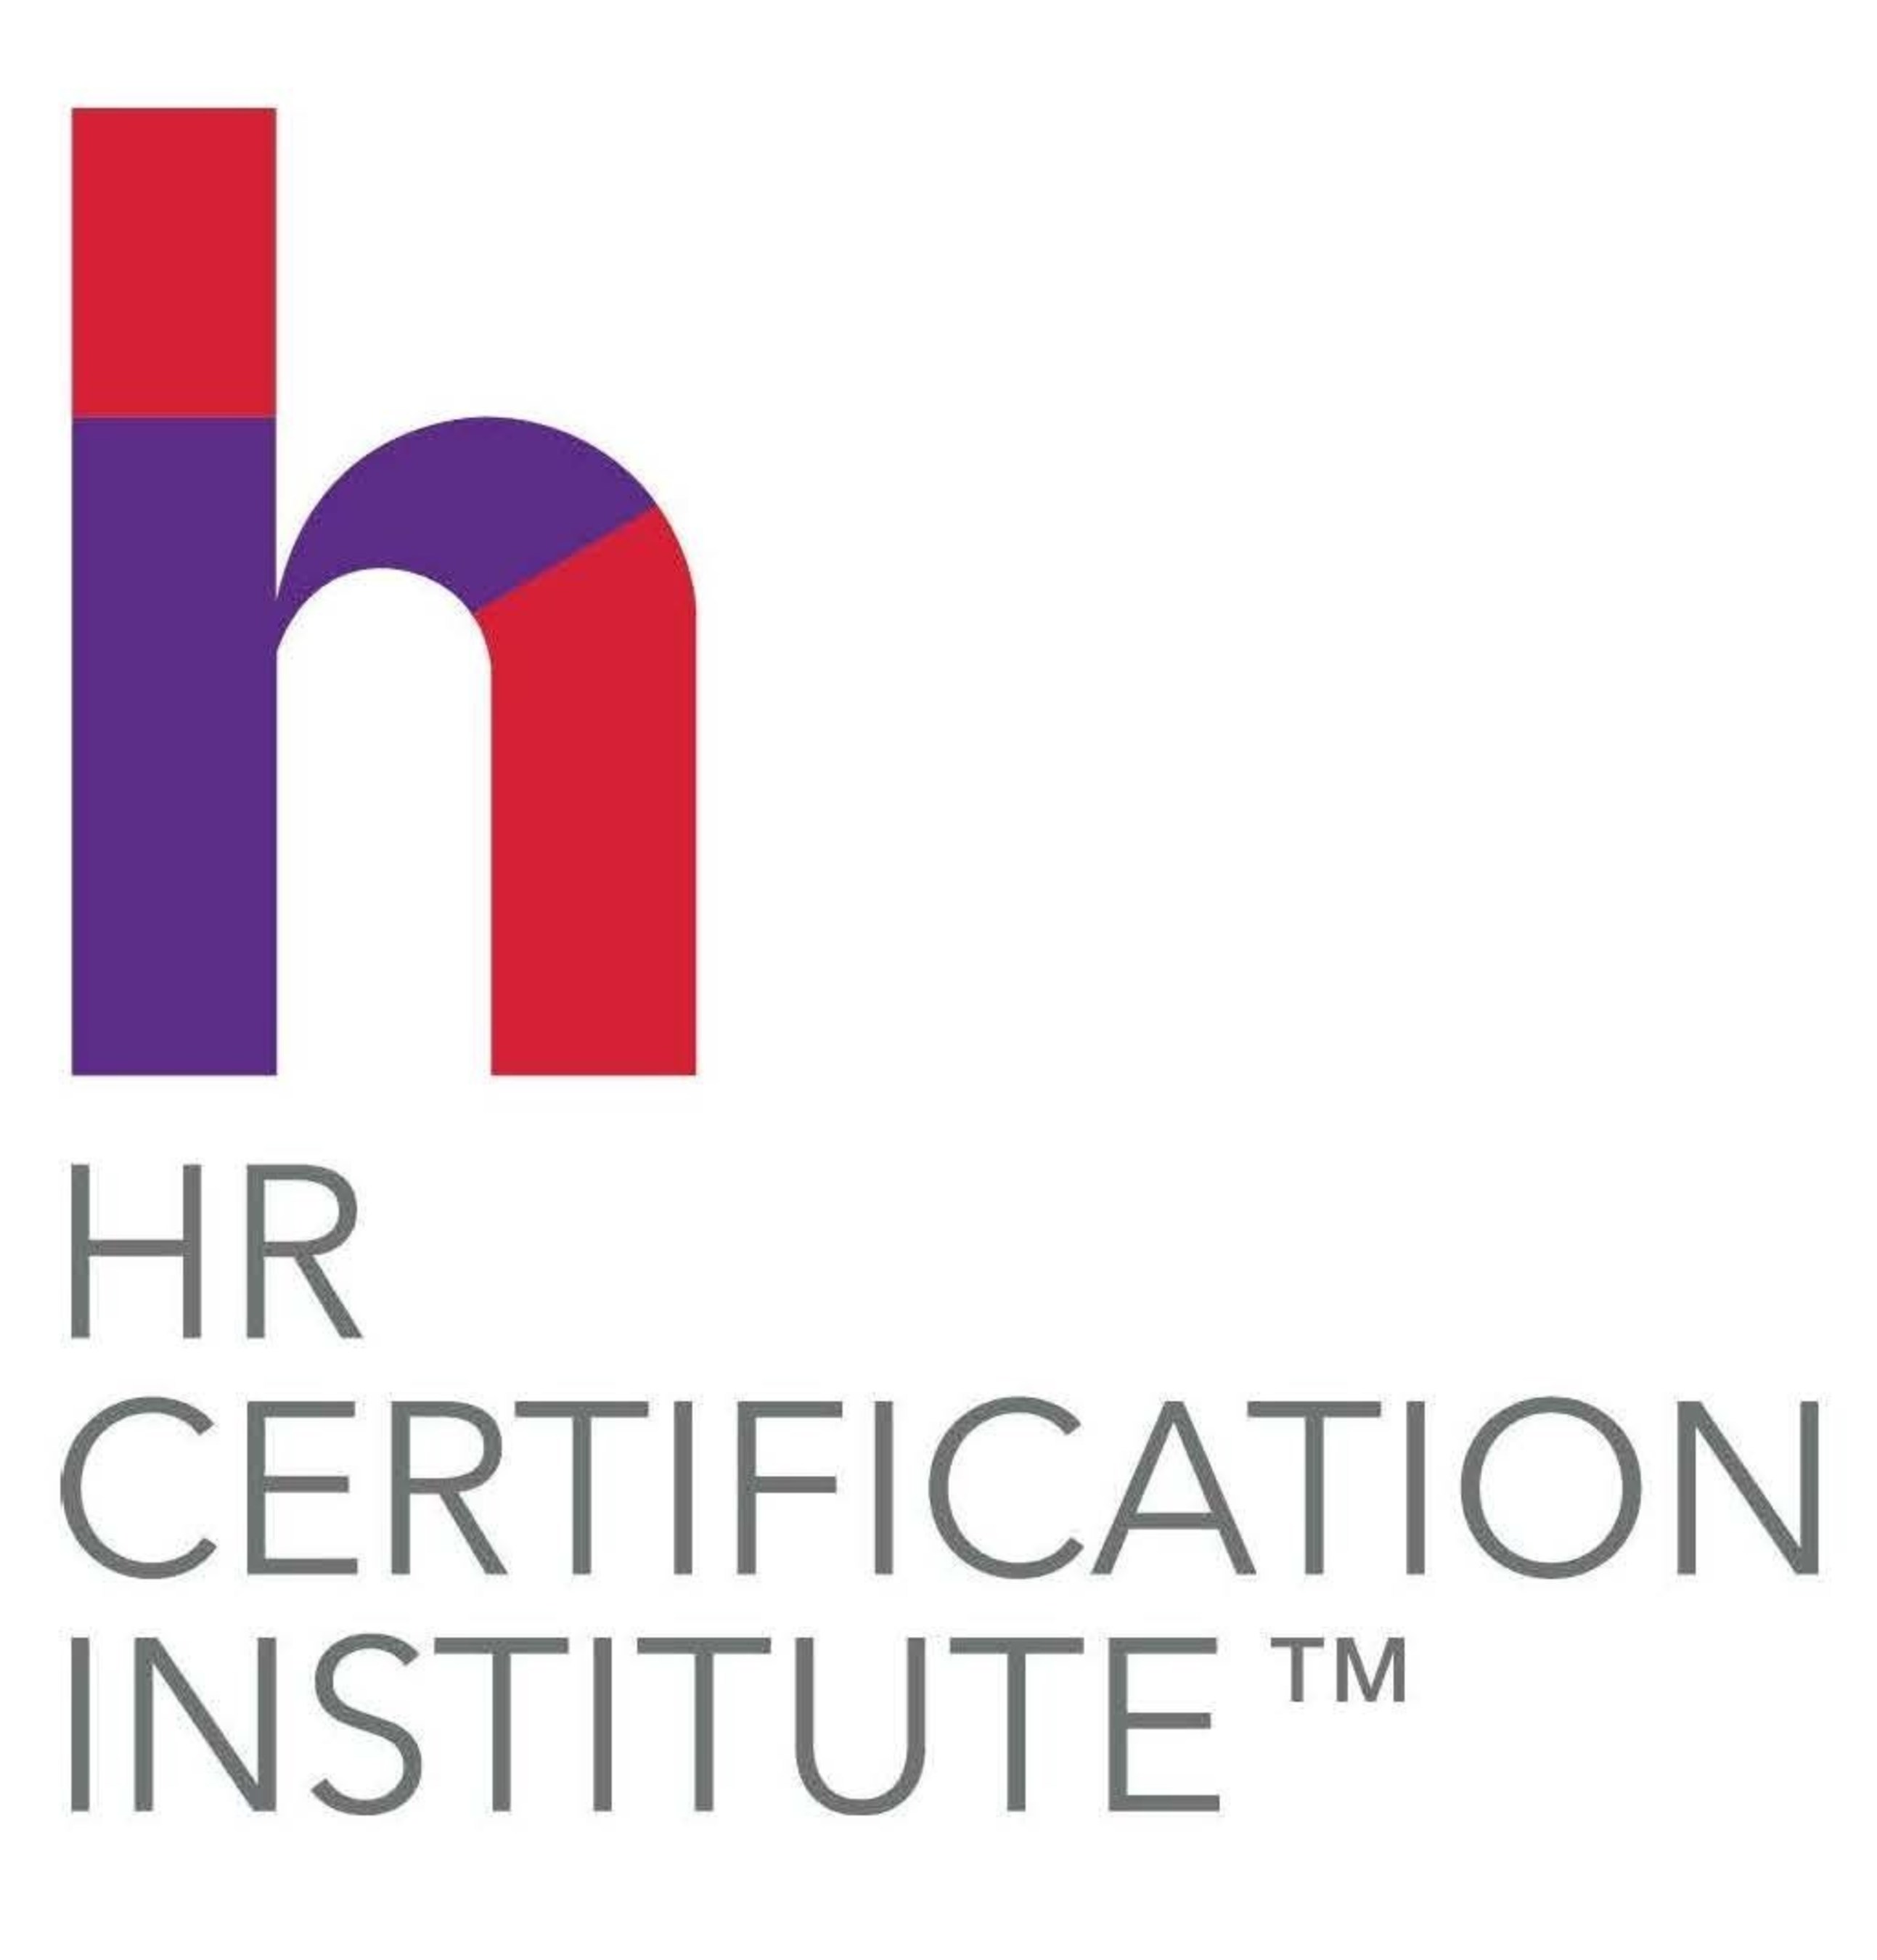 Certified Professional in Human Resources (PHR)